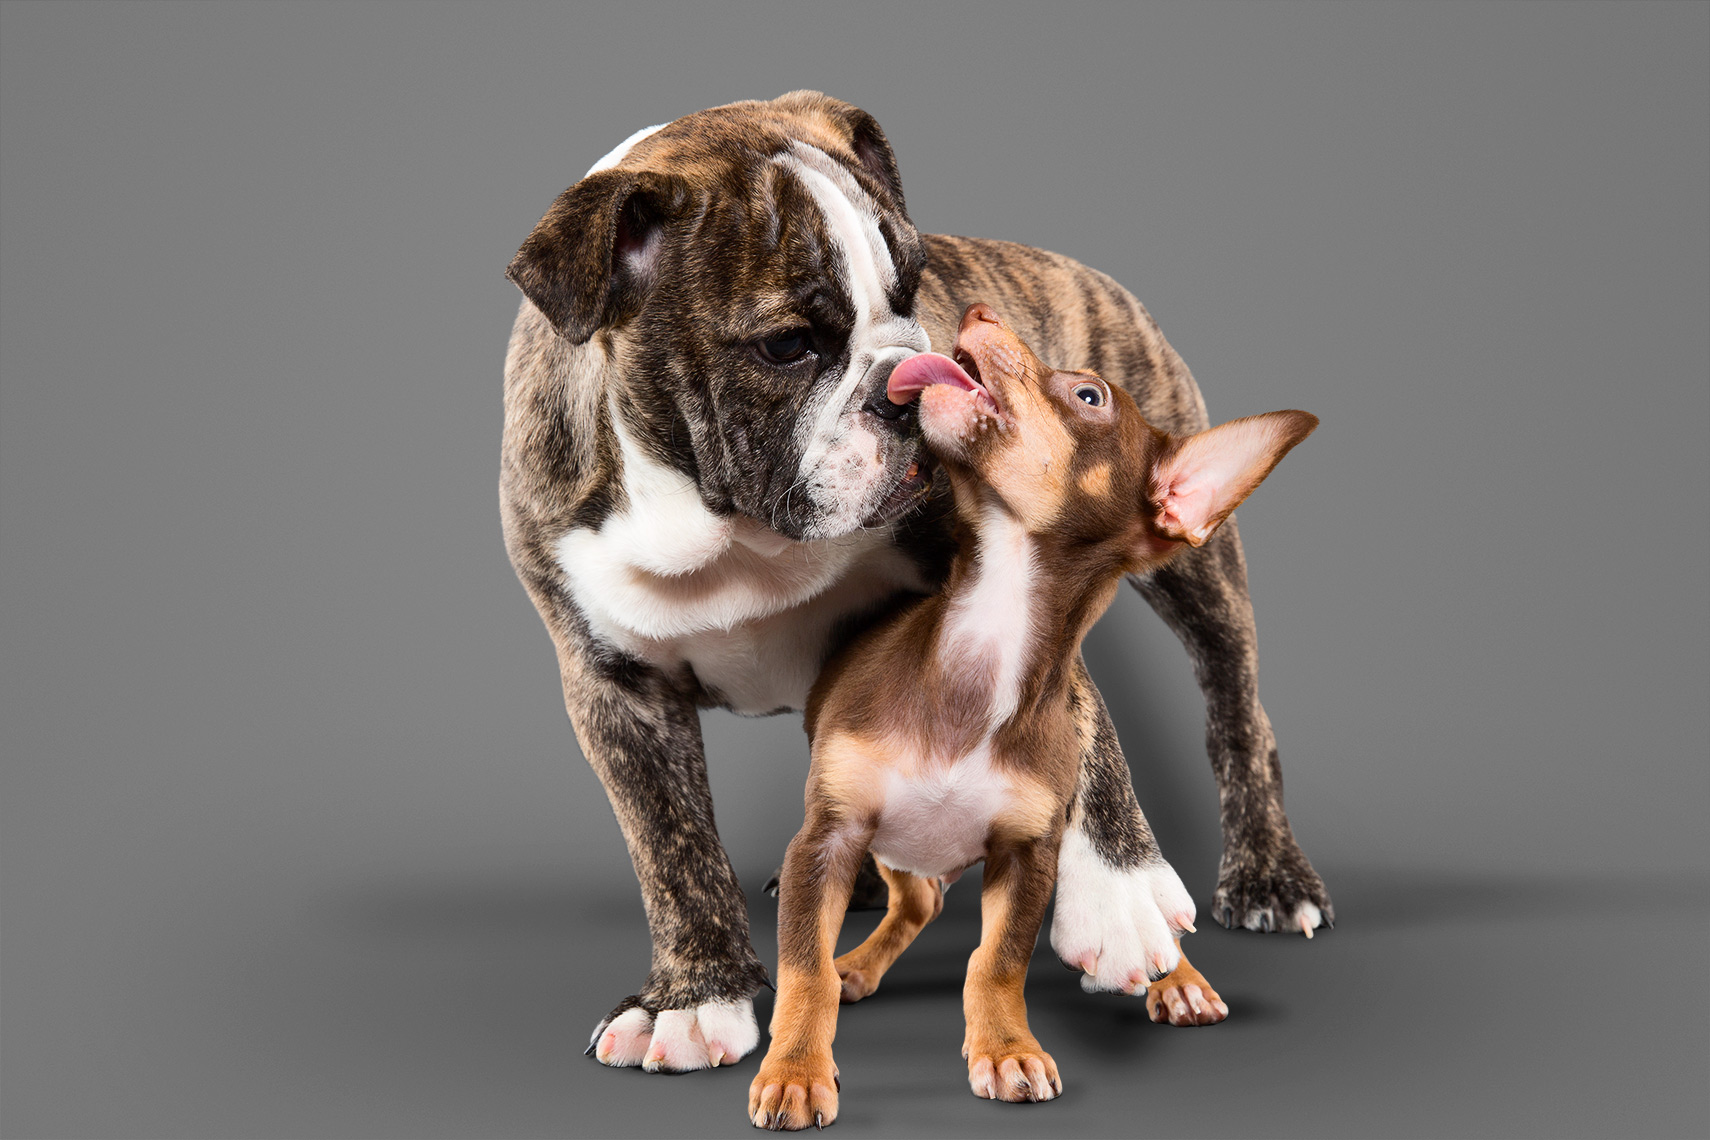 Puppy bulldog and a puppy Chihuahua licking each other in studio